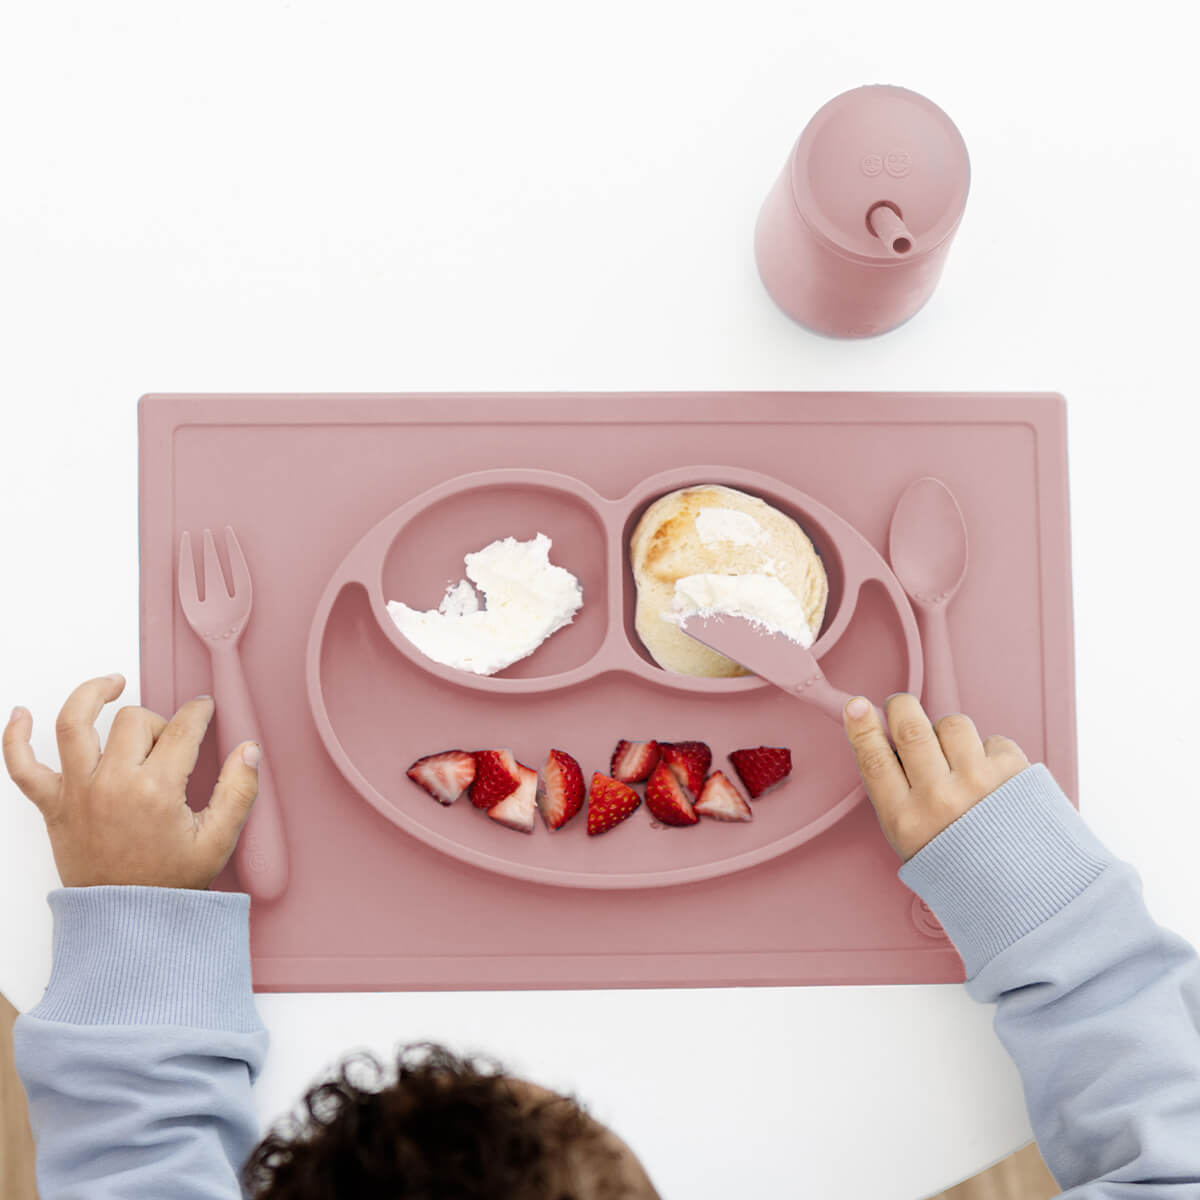 ezpz Happy Feeding Set in Blush / Silicone, Self-Suctioning Plate, Silicone Cup and Straw, Training Utensils for Toddlers